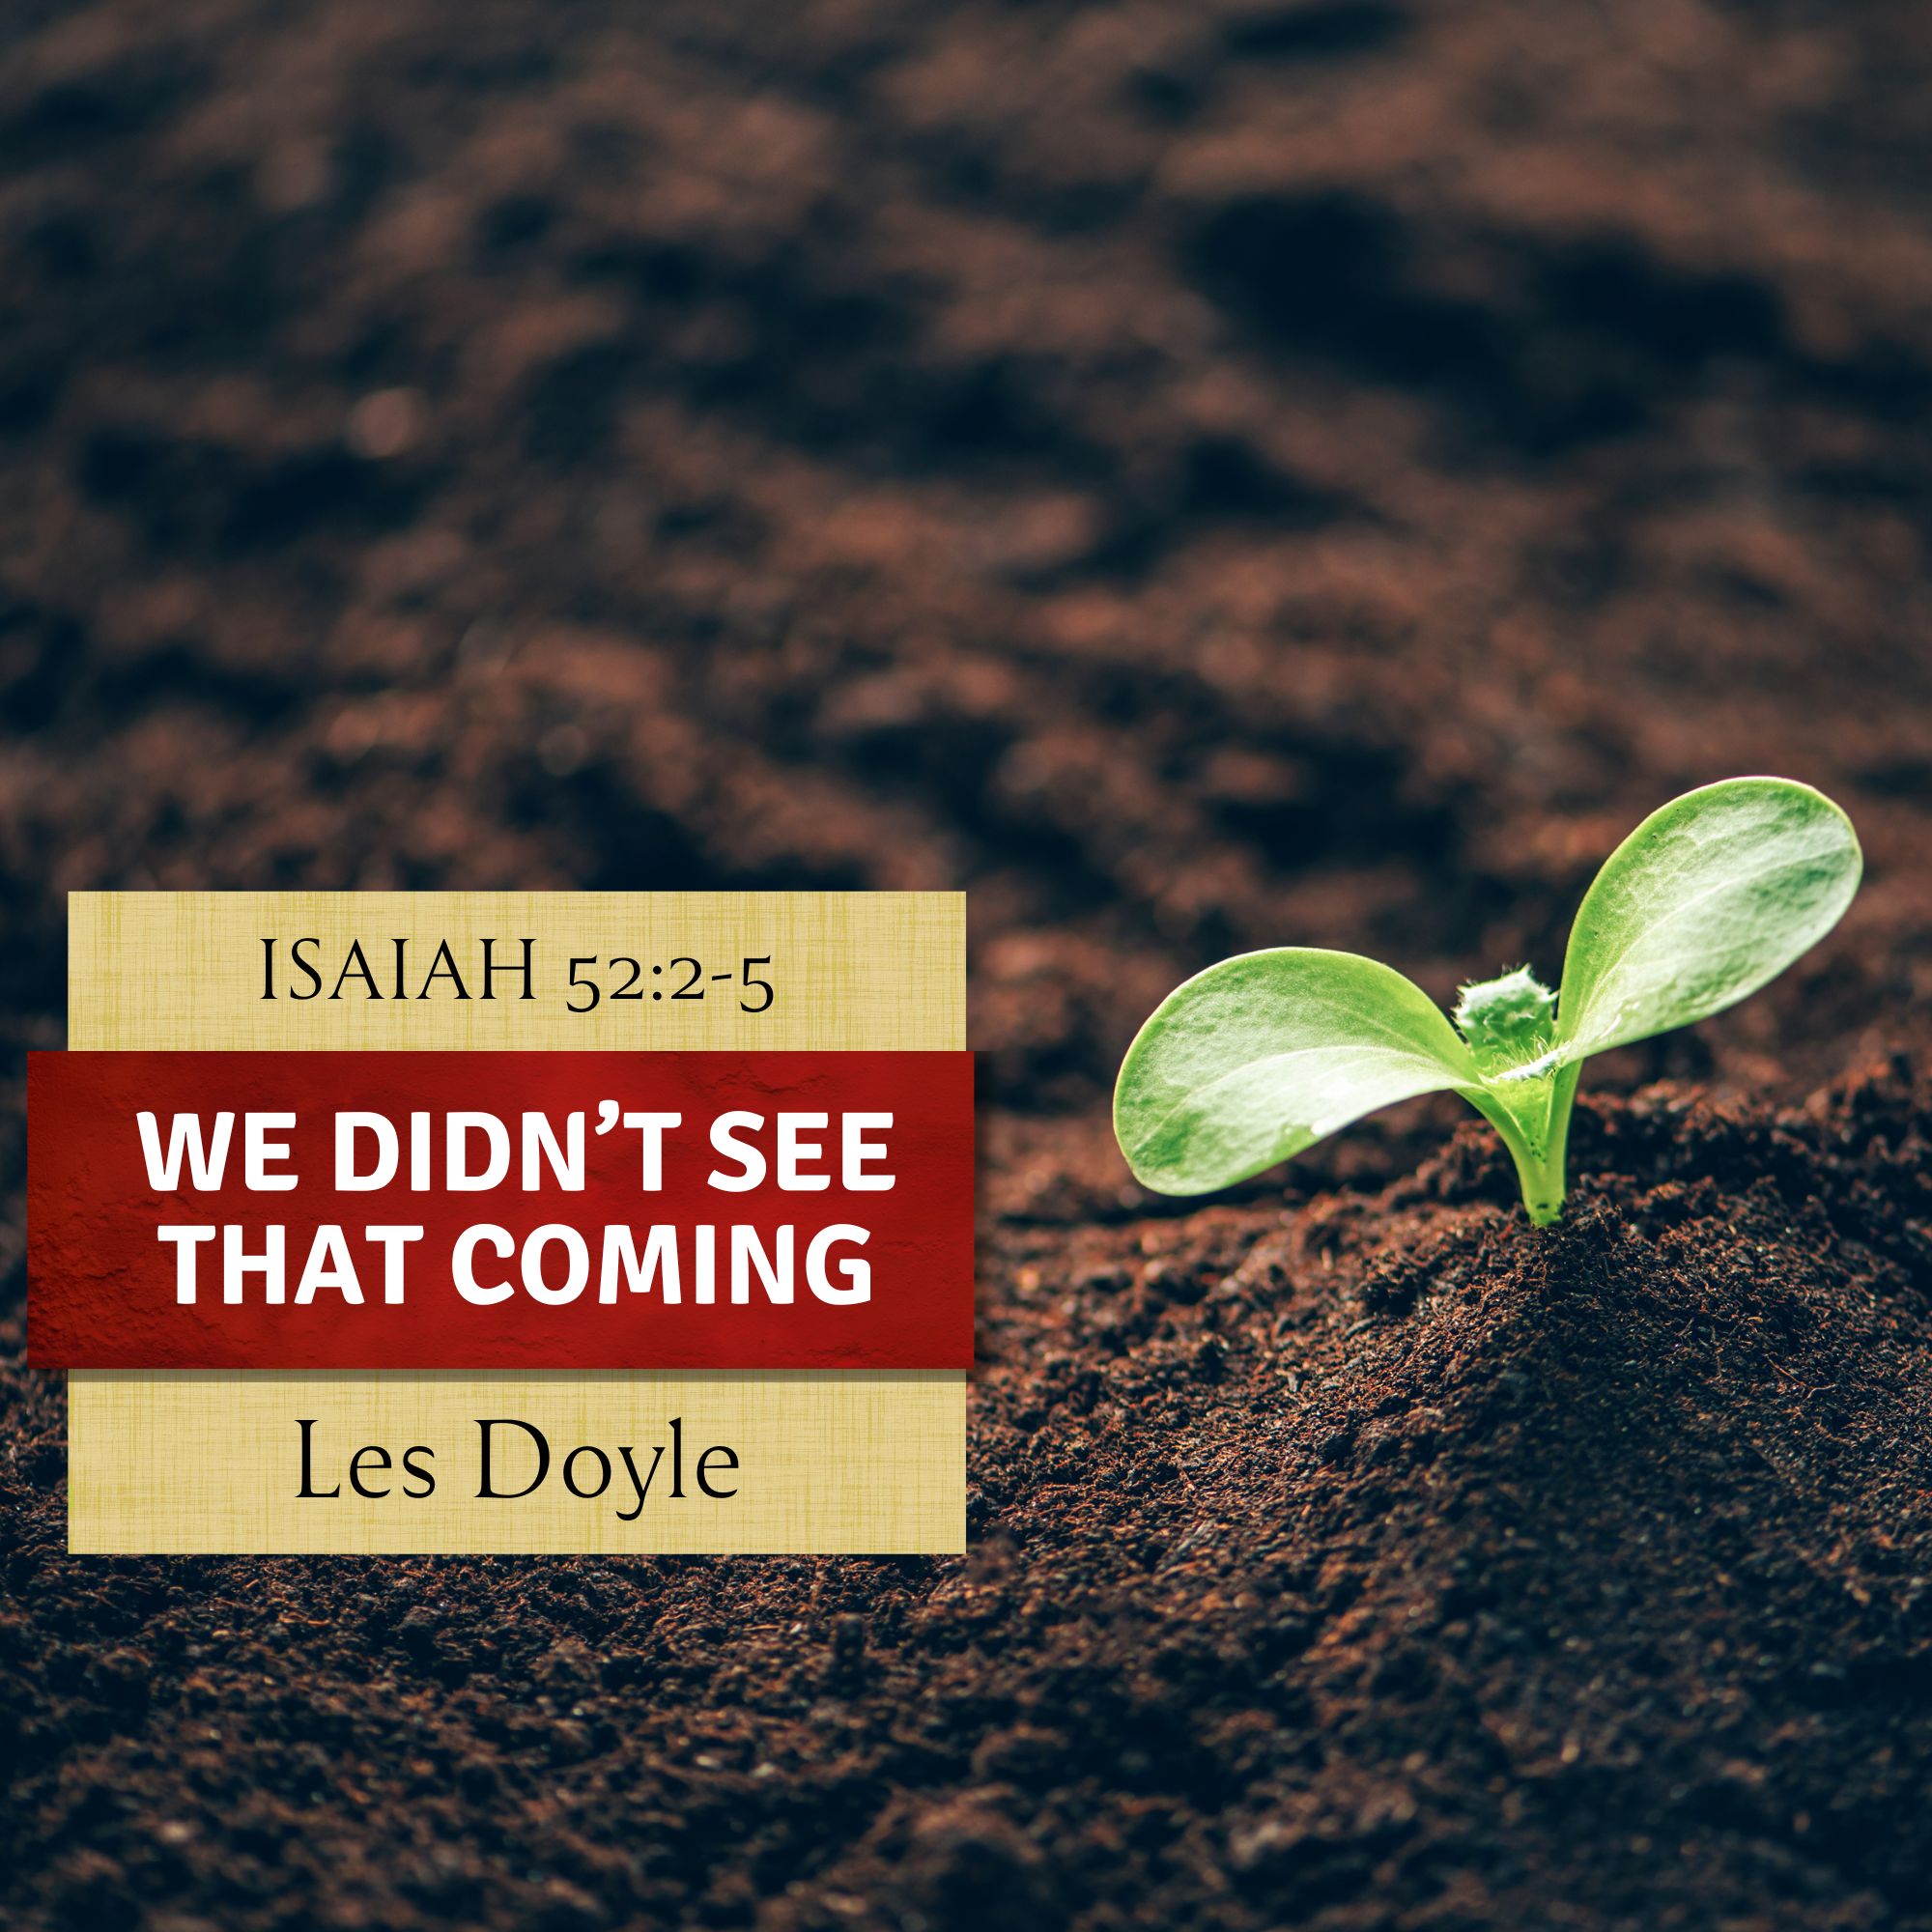 Ep. 177 - Isaiah 52:2-5 | We Didn't See That Coming | Les Doyle